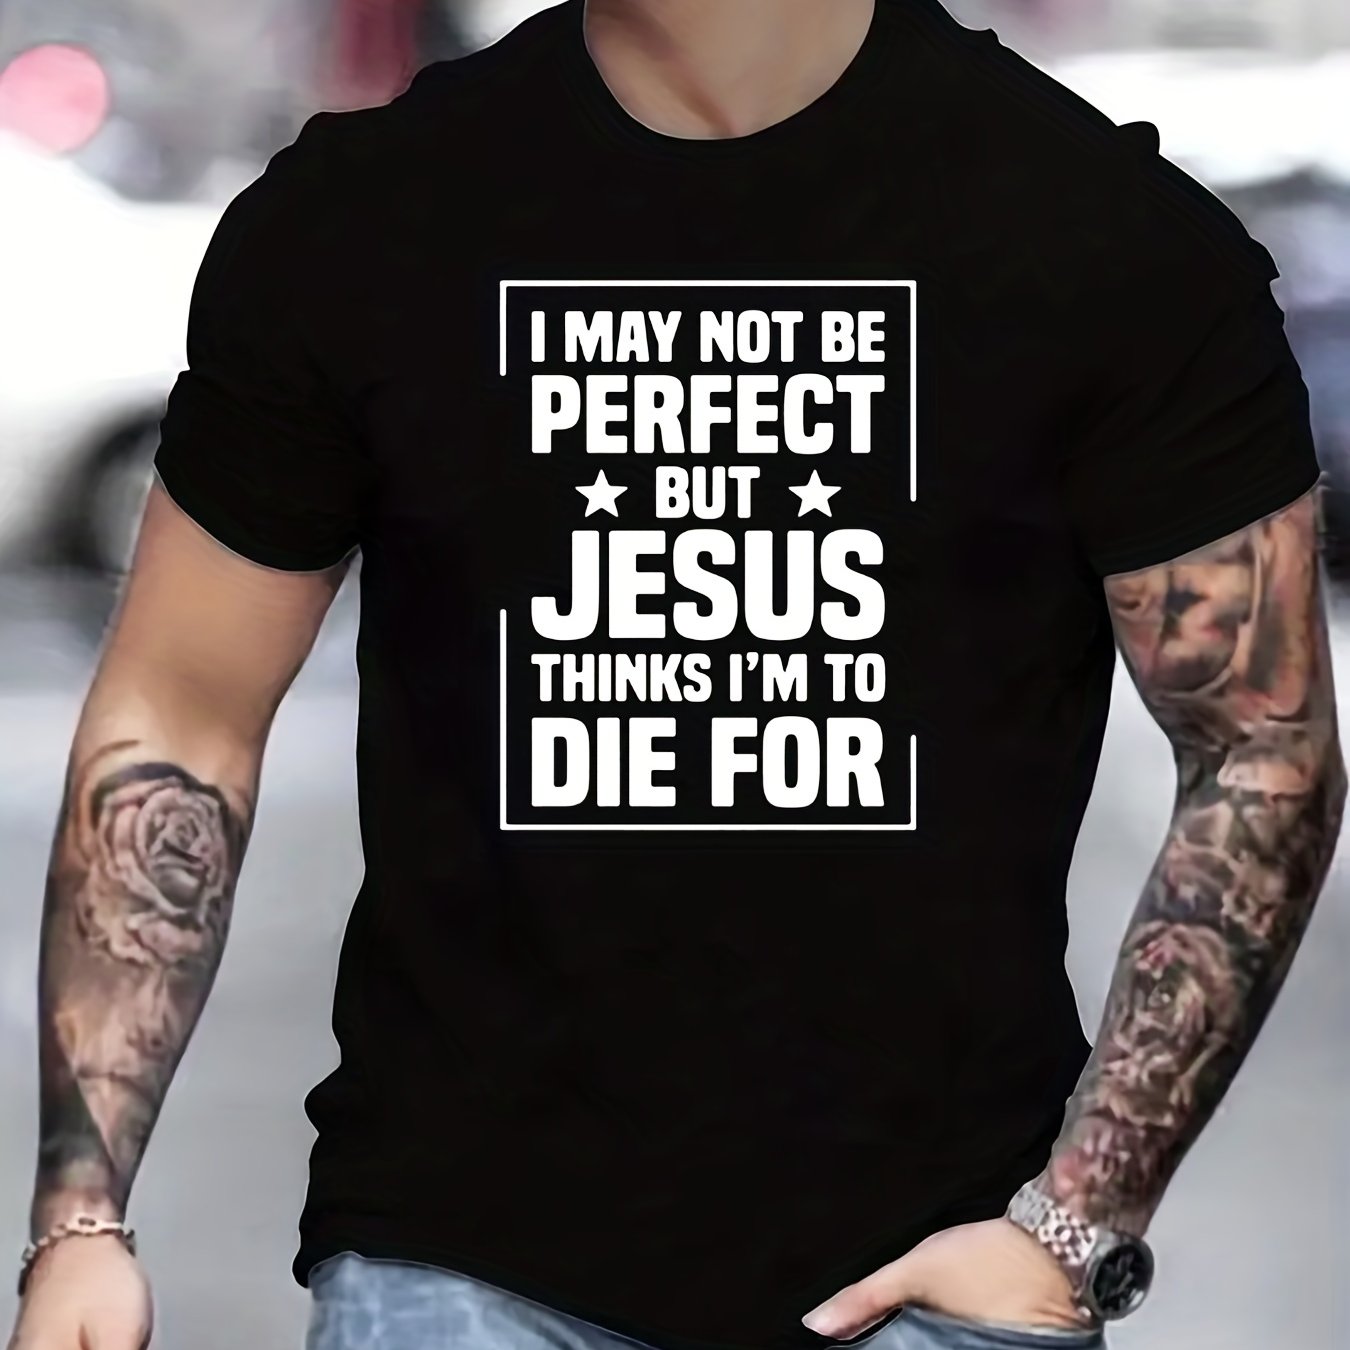 I May Not Be Perfect But Jesus Thinks I'm To Die For Men's Christian T Shirt claimedbygoddesigns